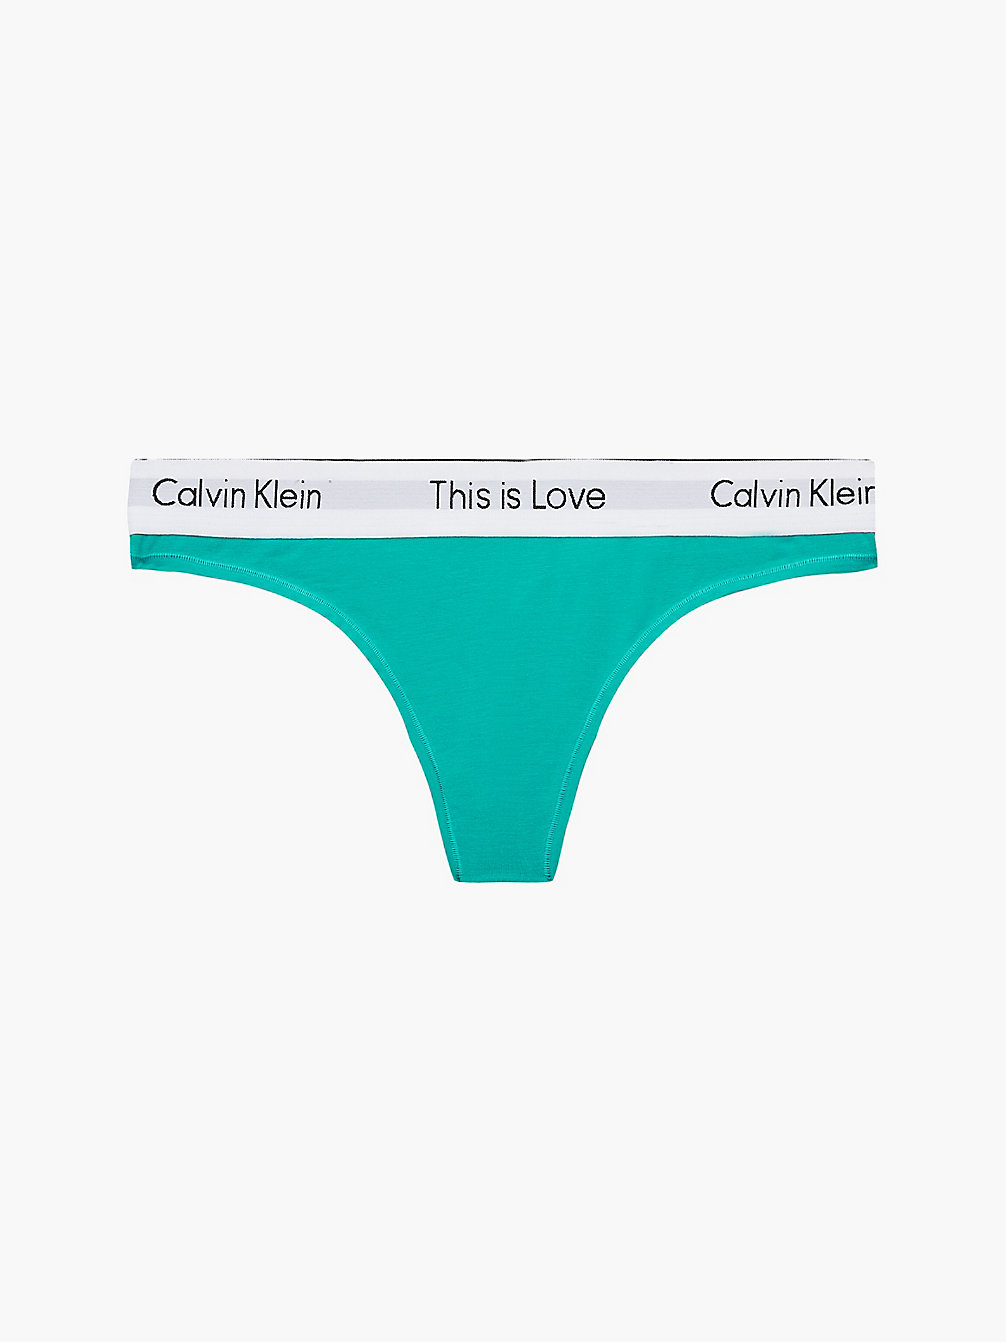 ISLAND TURQUOISE Thong - Pride undefined women Calvin Klein